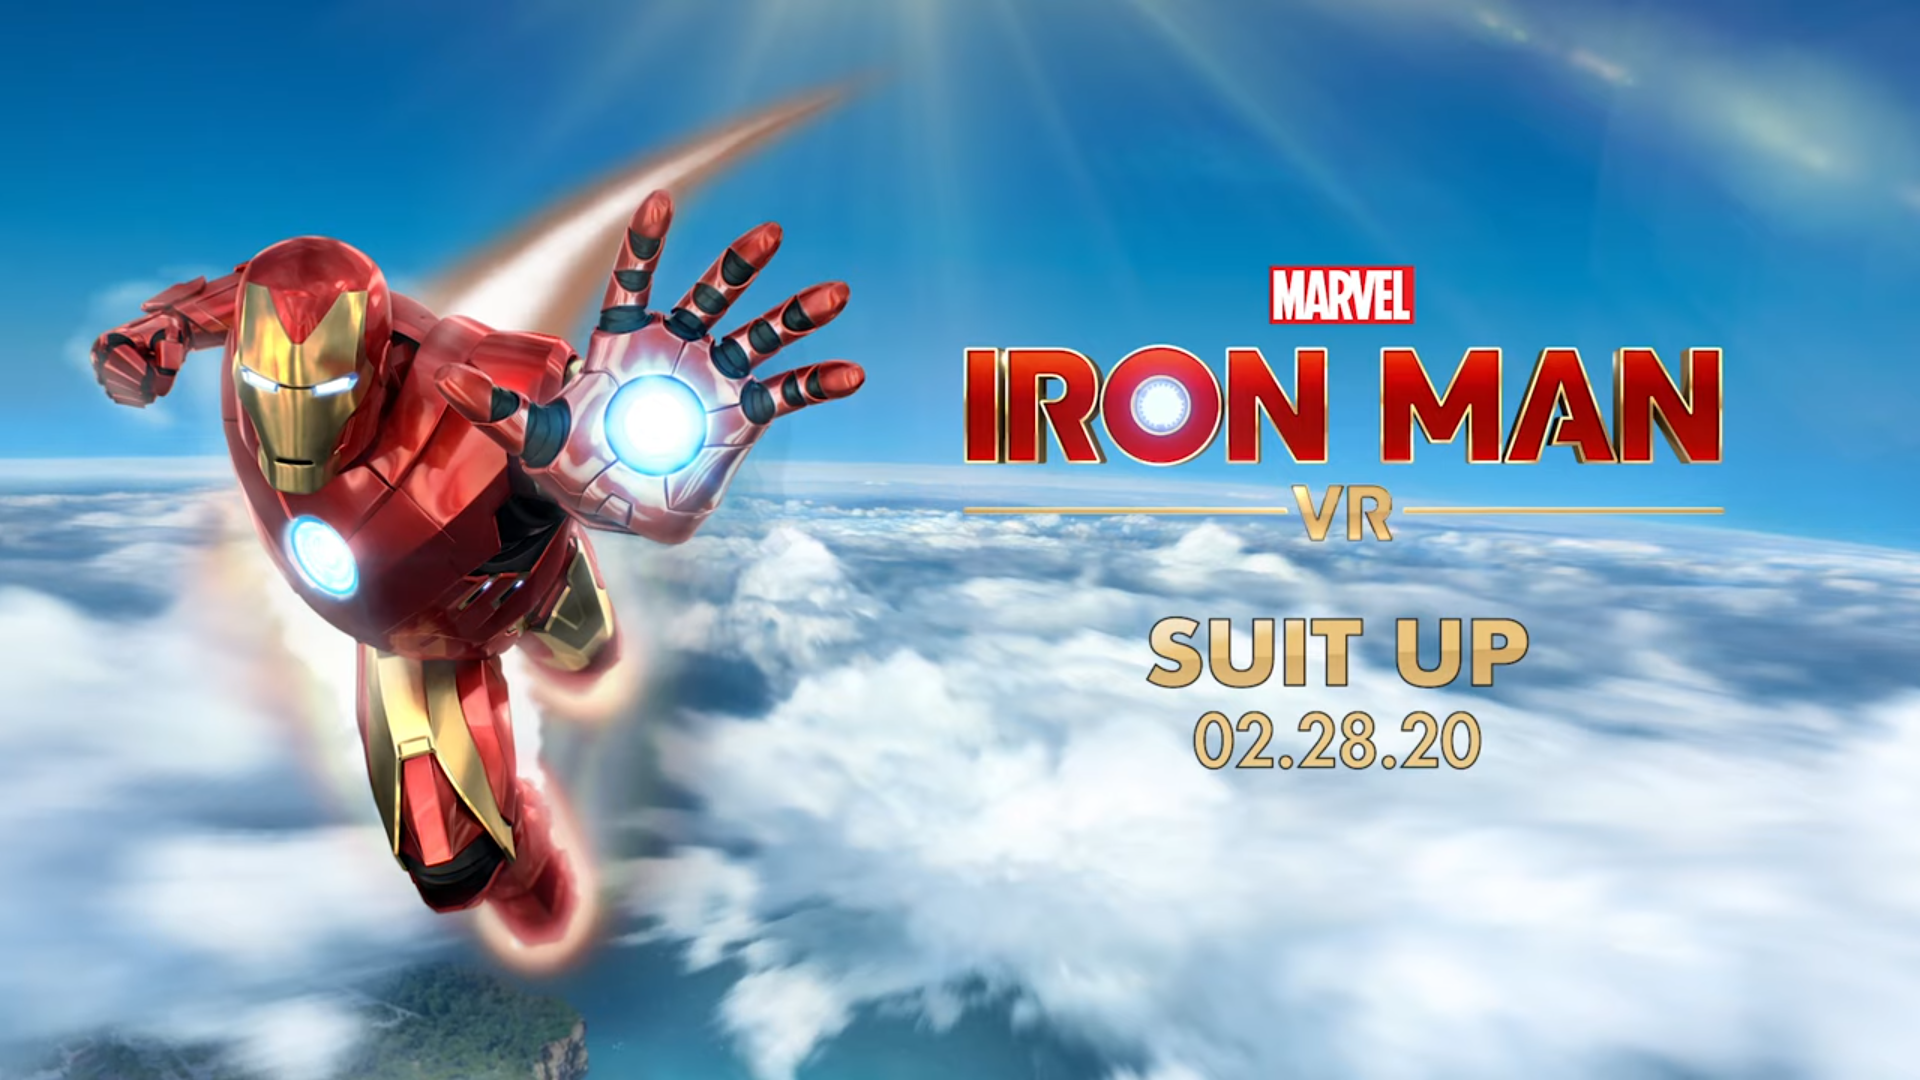 Iron Man VR Release Date Finally Lets Us Know When We'll Become